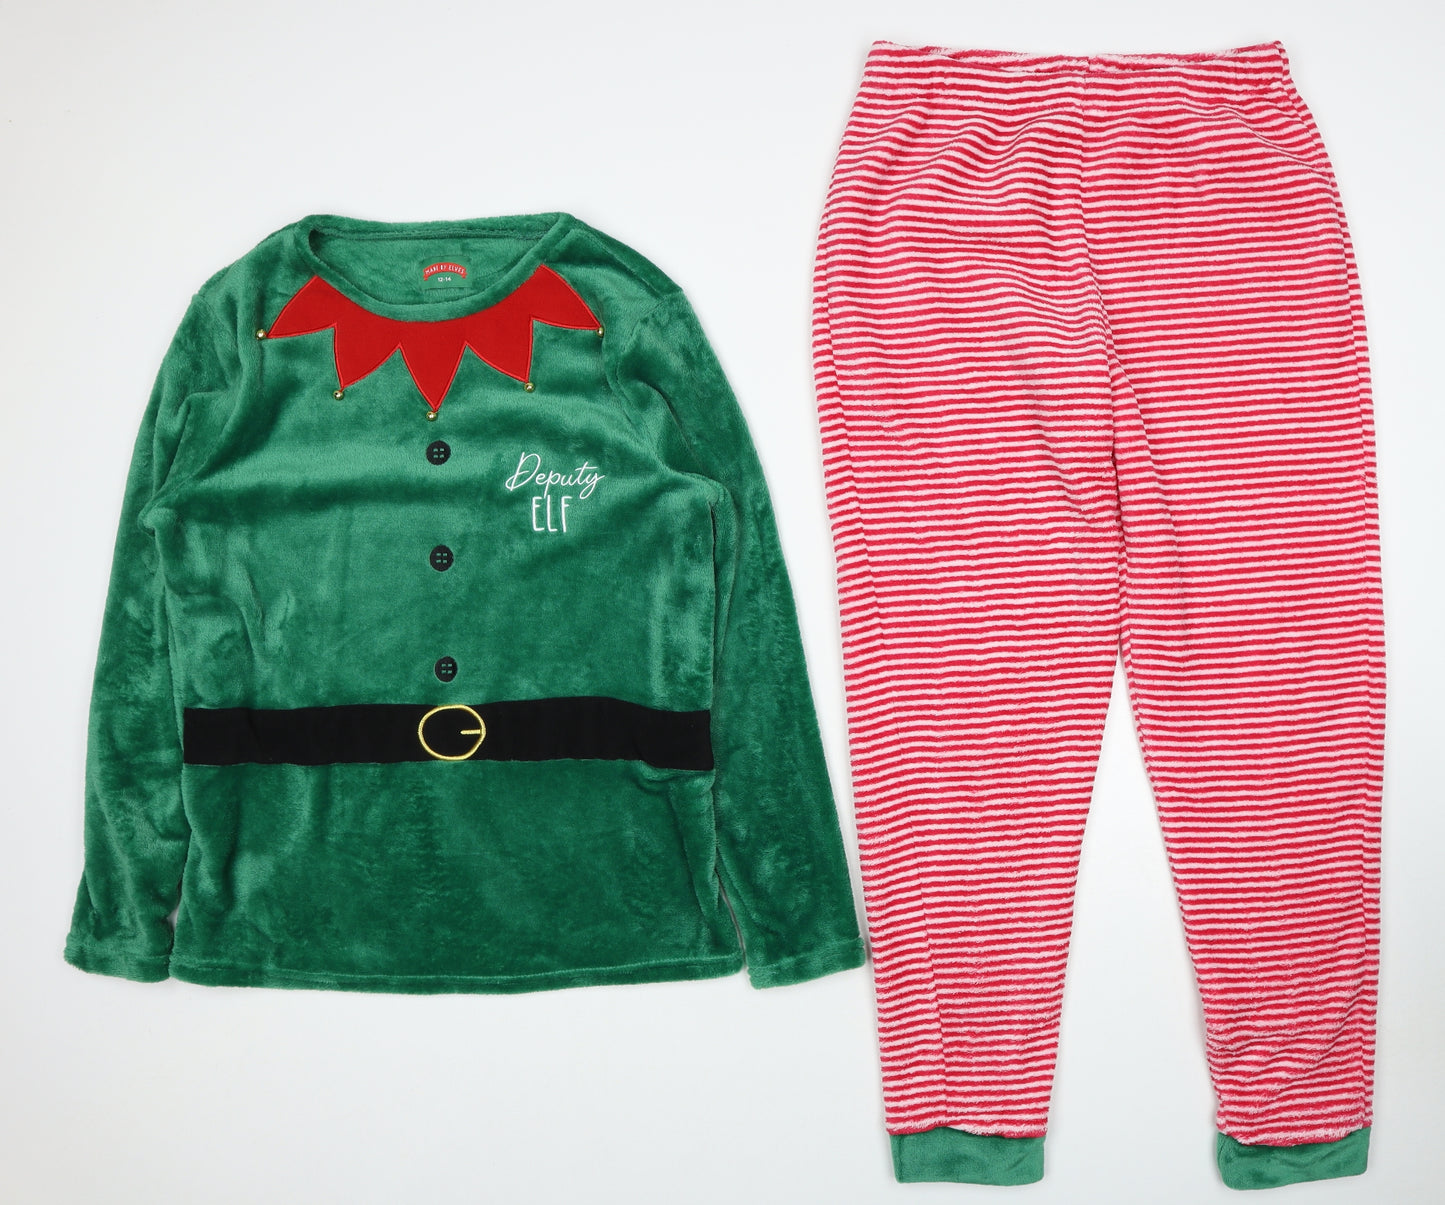 Made By Elves Womens Multicoloured Striped Polyester Top Pyjama Set Size 12 - Deputy Elf Christmas Size 12-14